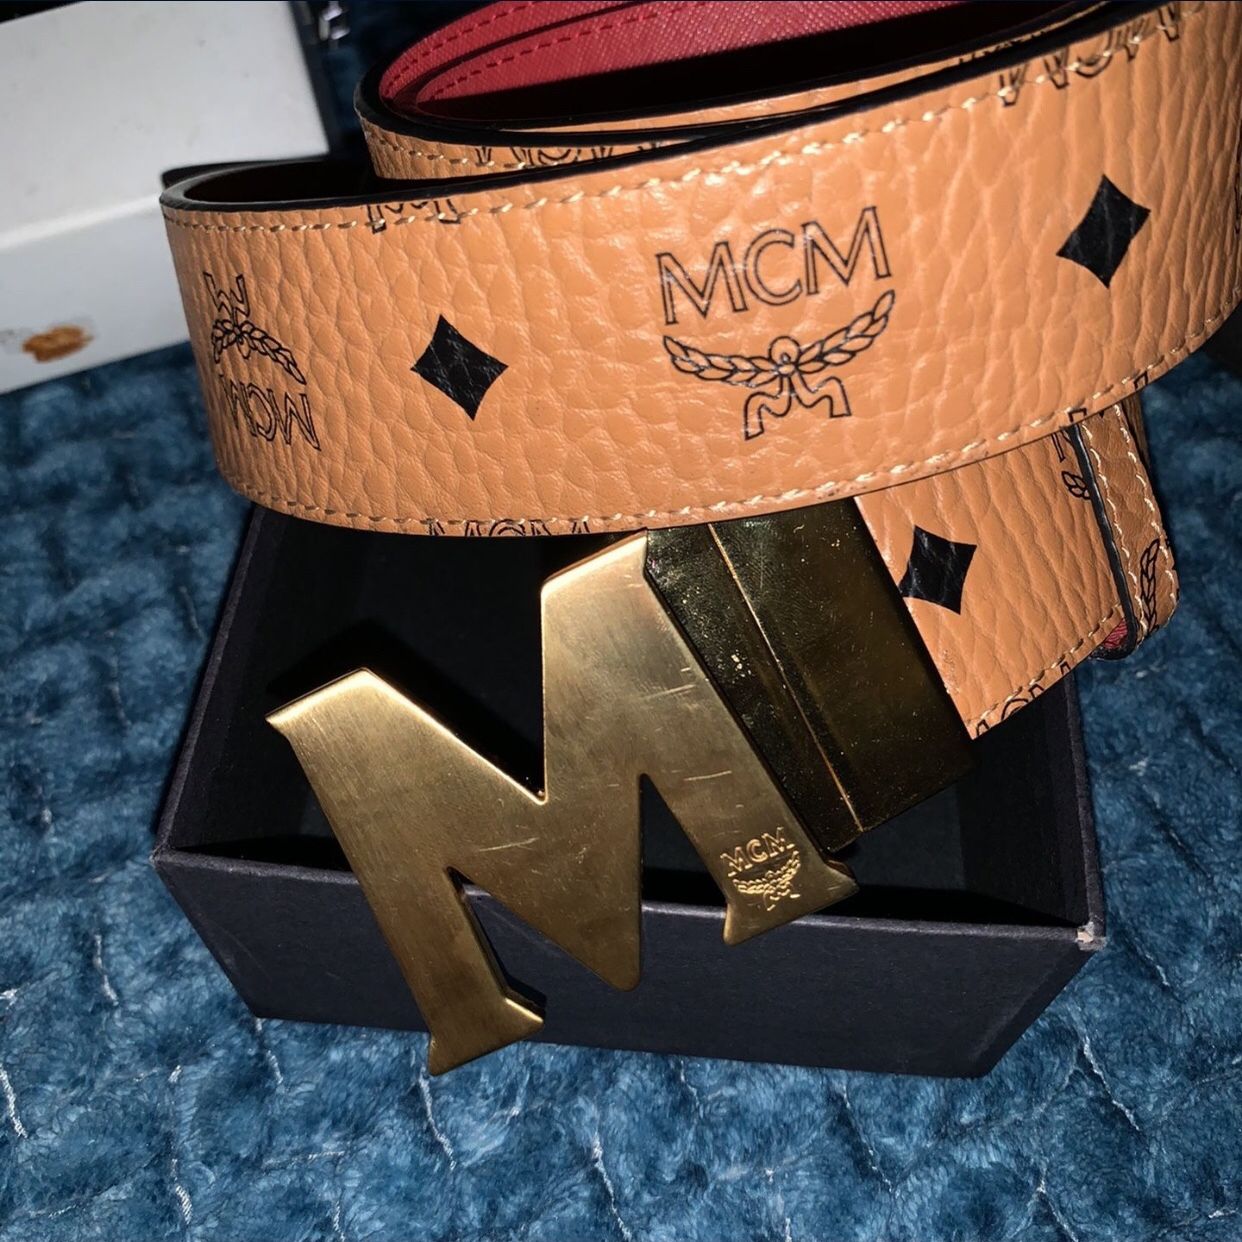 How to tell if your MCM belt is REAL or FAKE? **IMPORTANT DETAILS